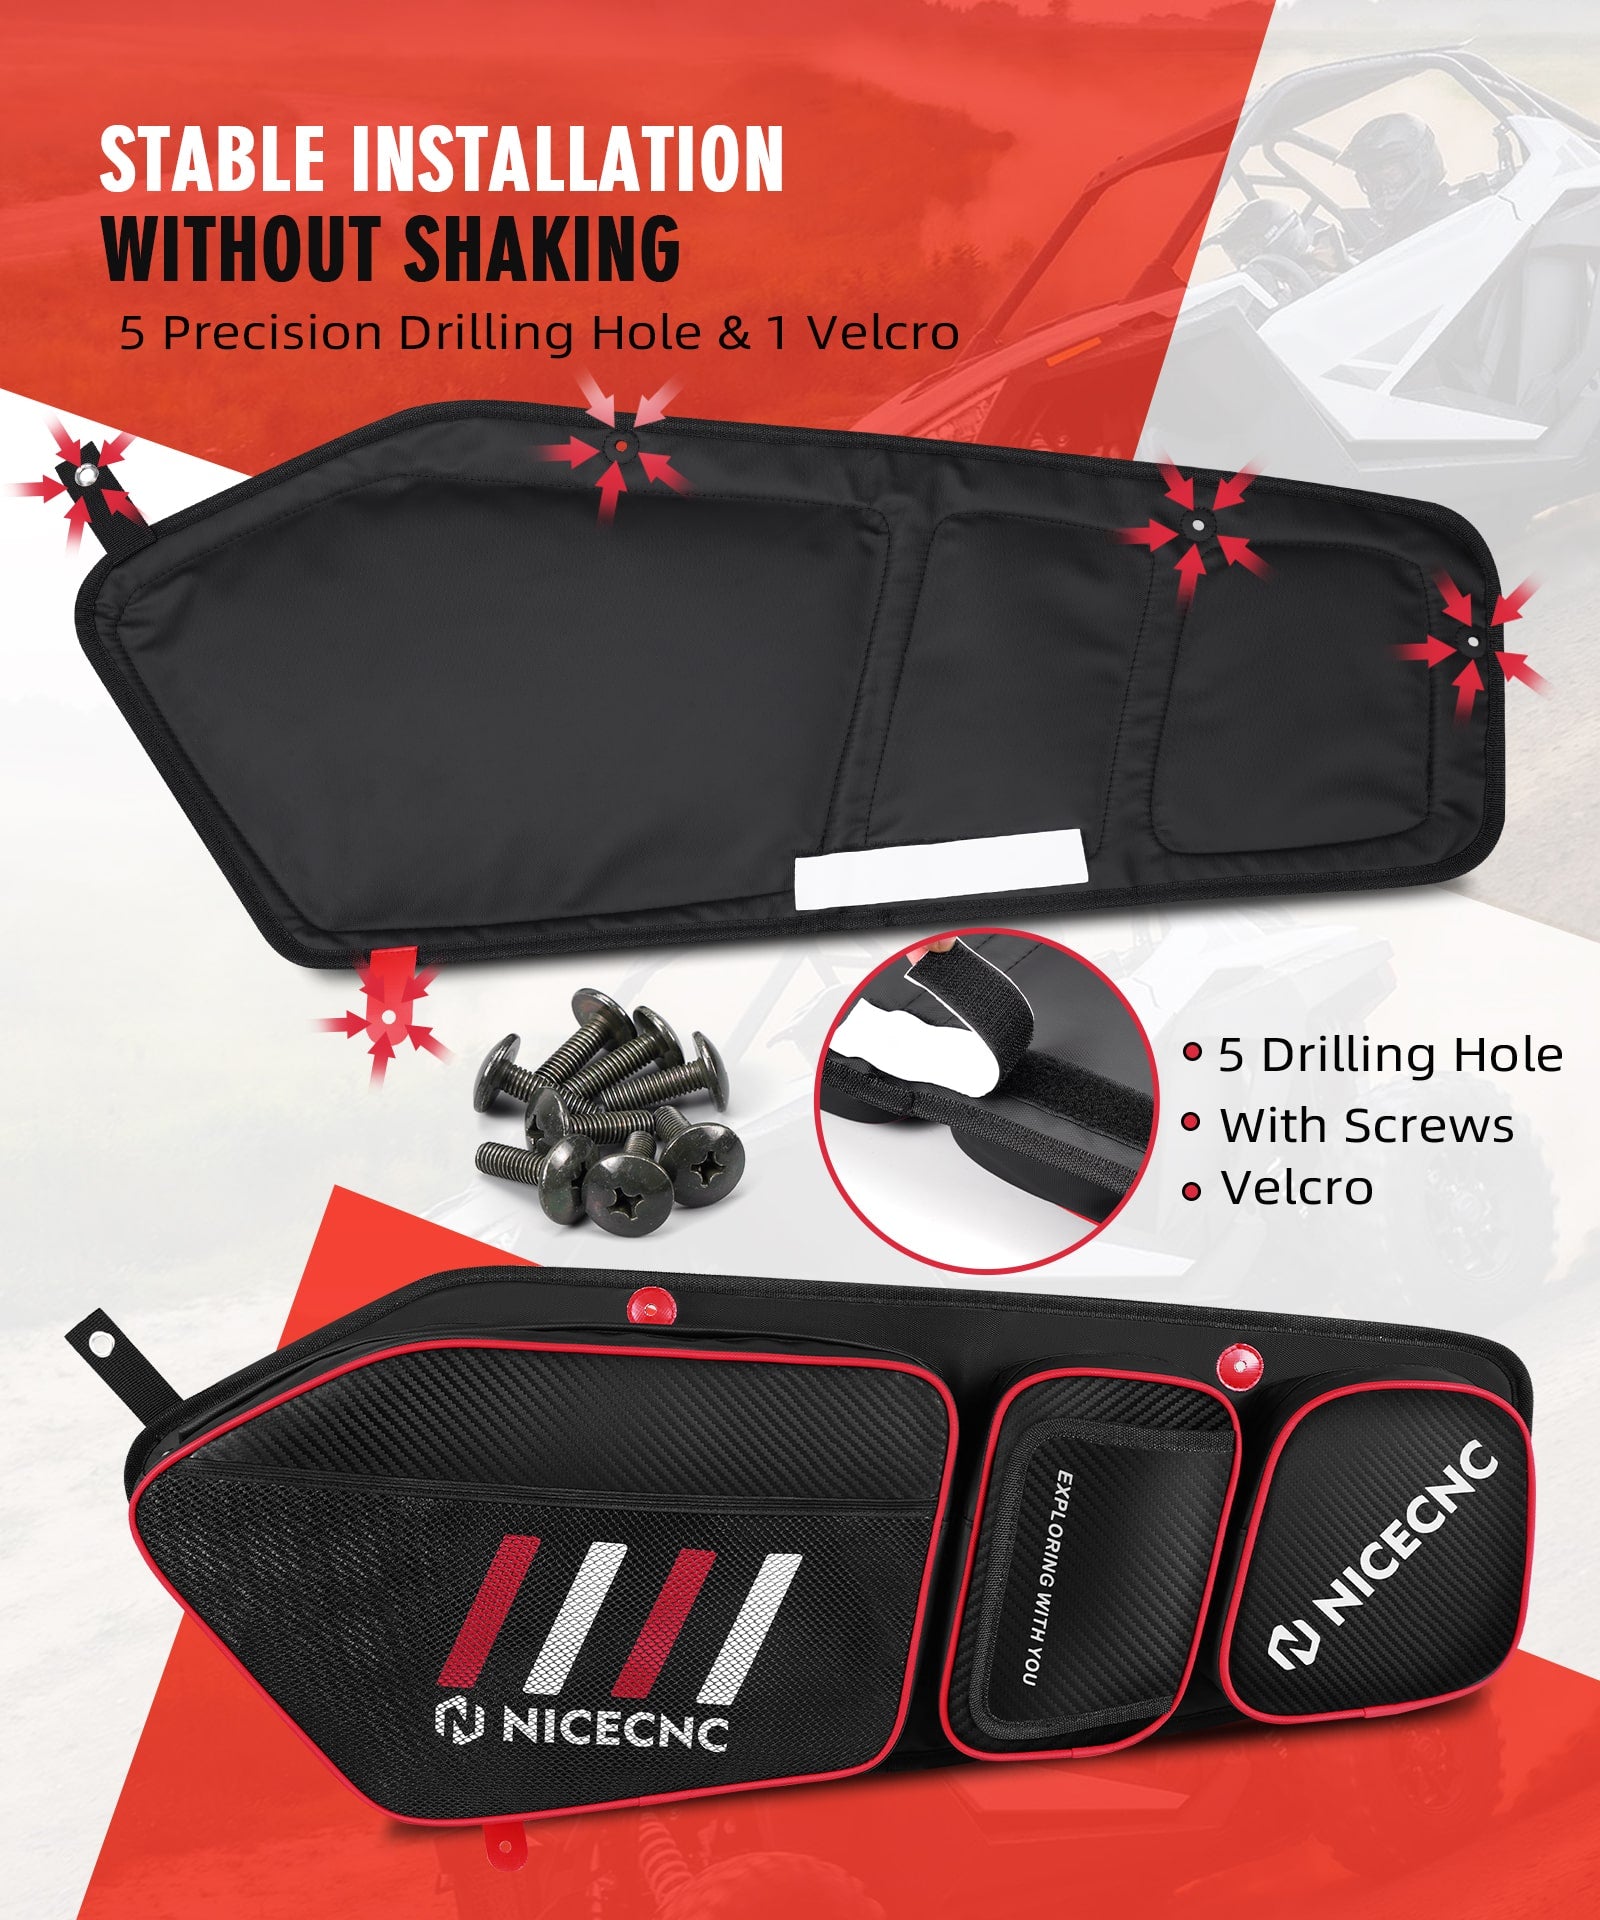 Upgraded Front Door Storage Bags Synthetic 1680D Fbric For Polaris RZR PRO XP/PRO R/TURBO R